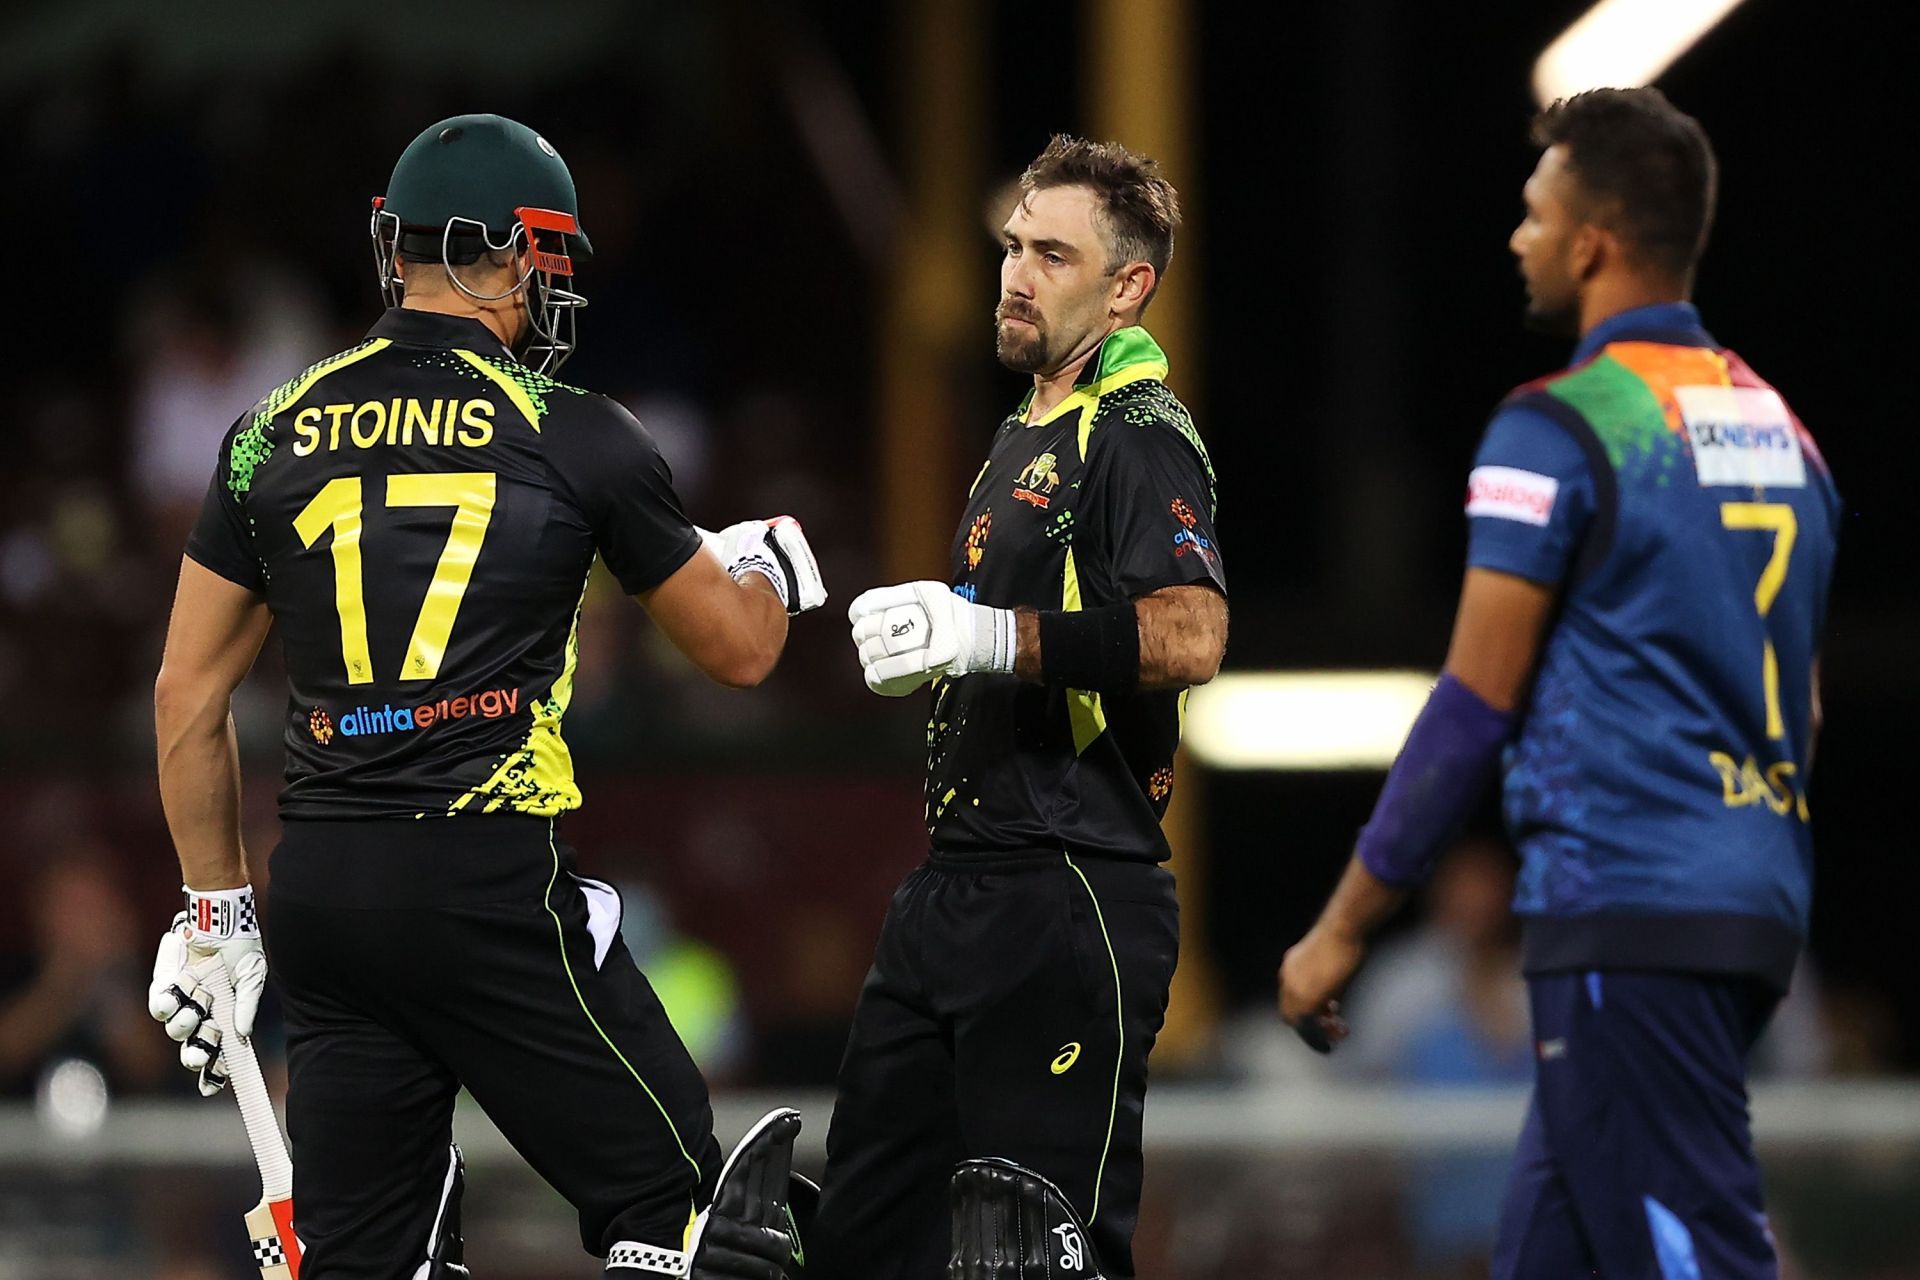 Australia celebrate after winning the Super Over in Sydney. Pic: Getty Images